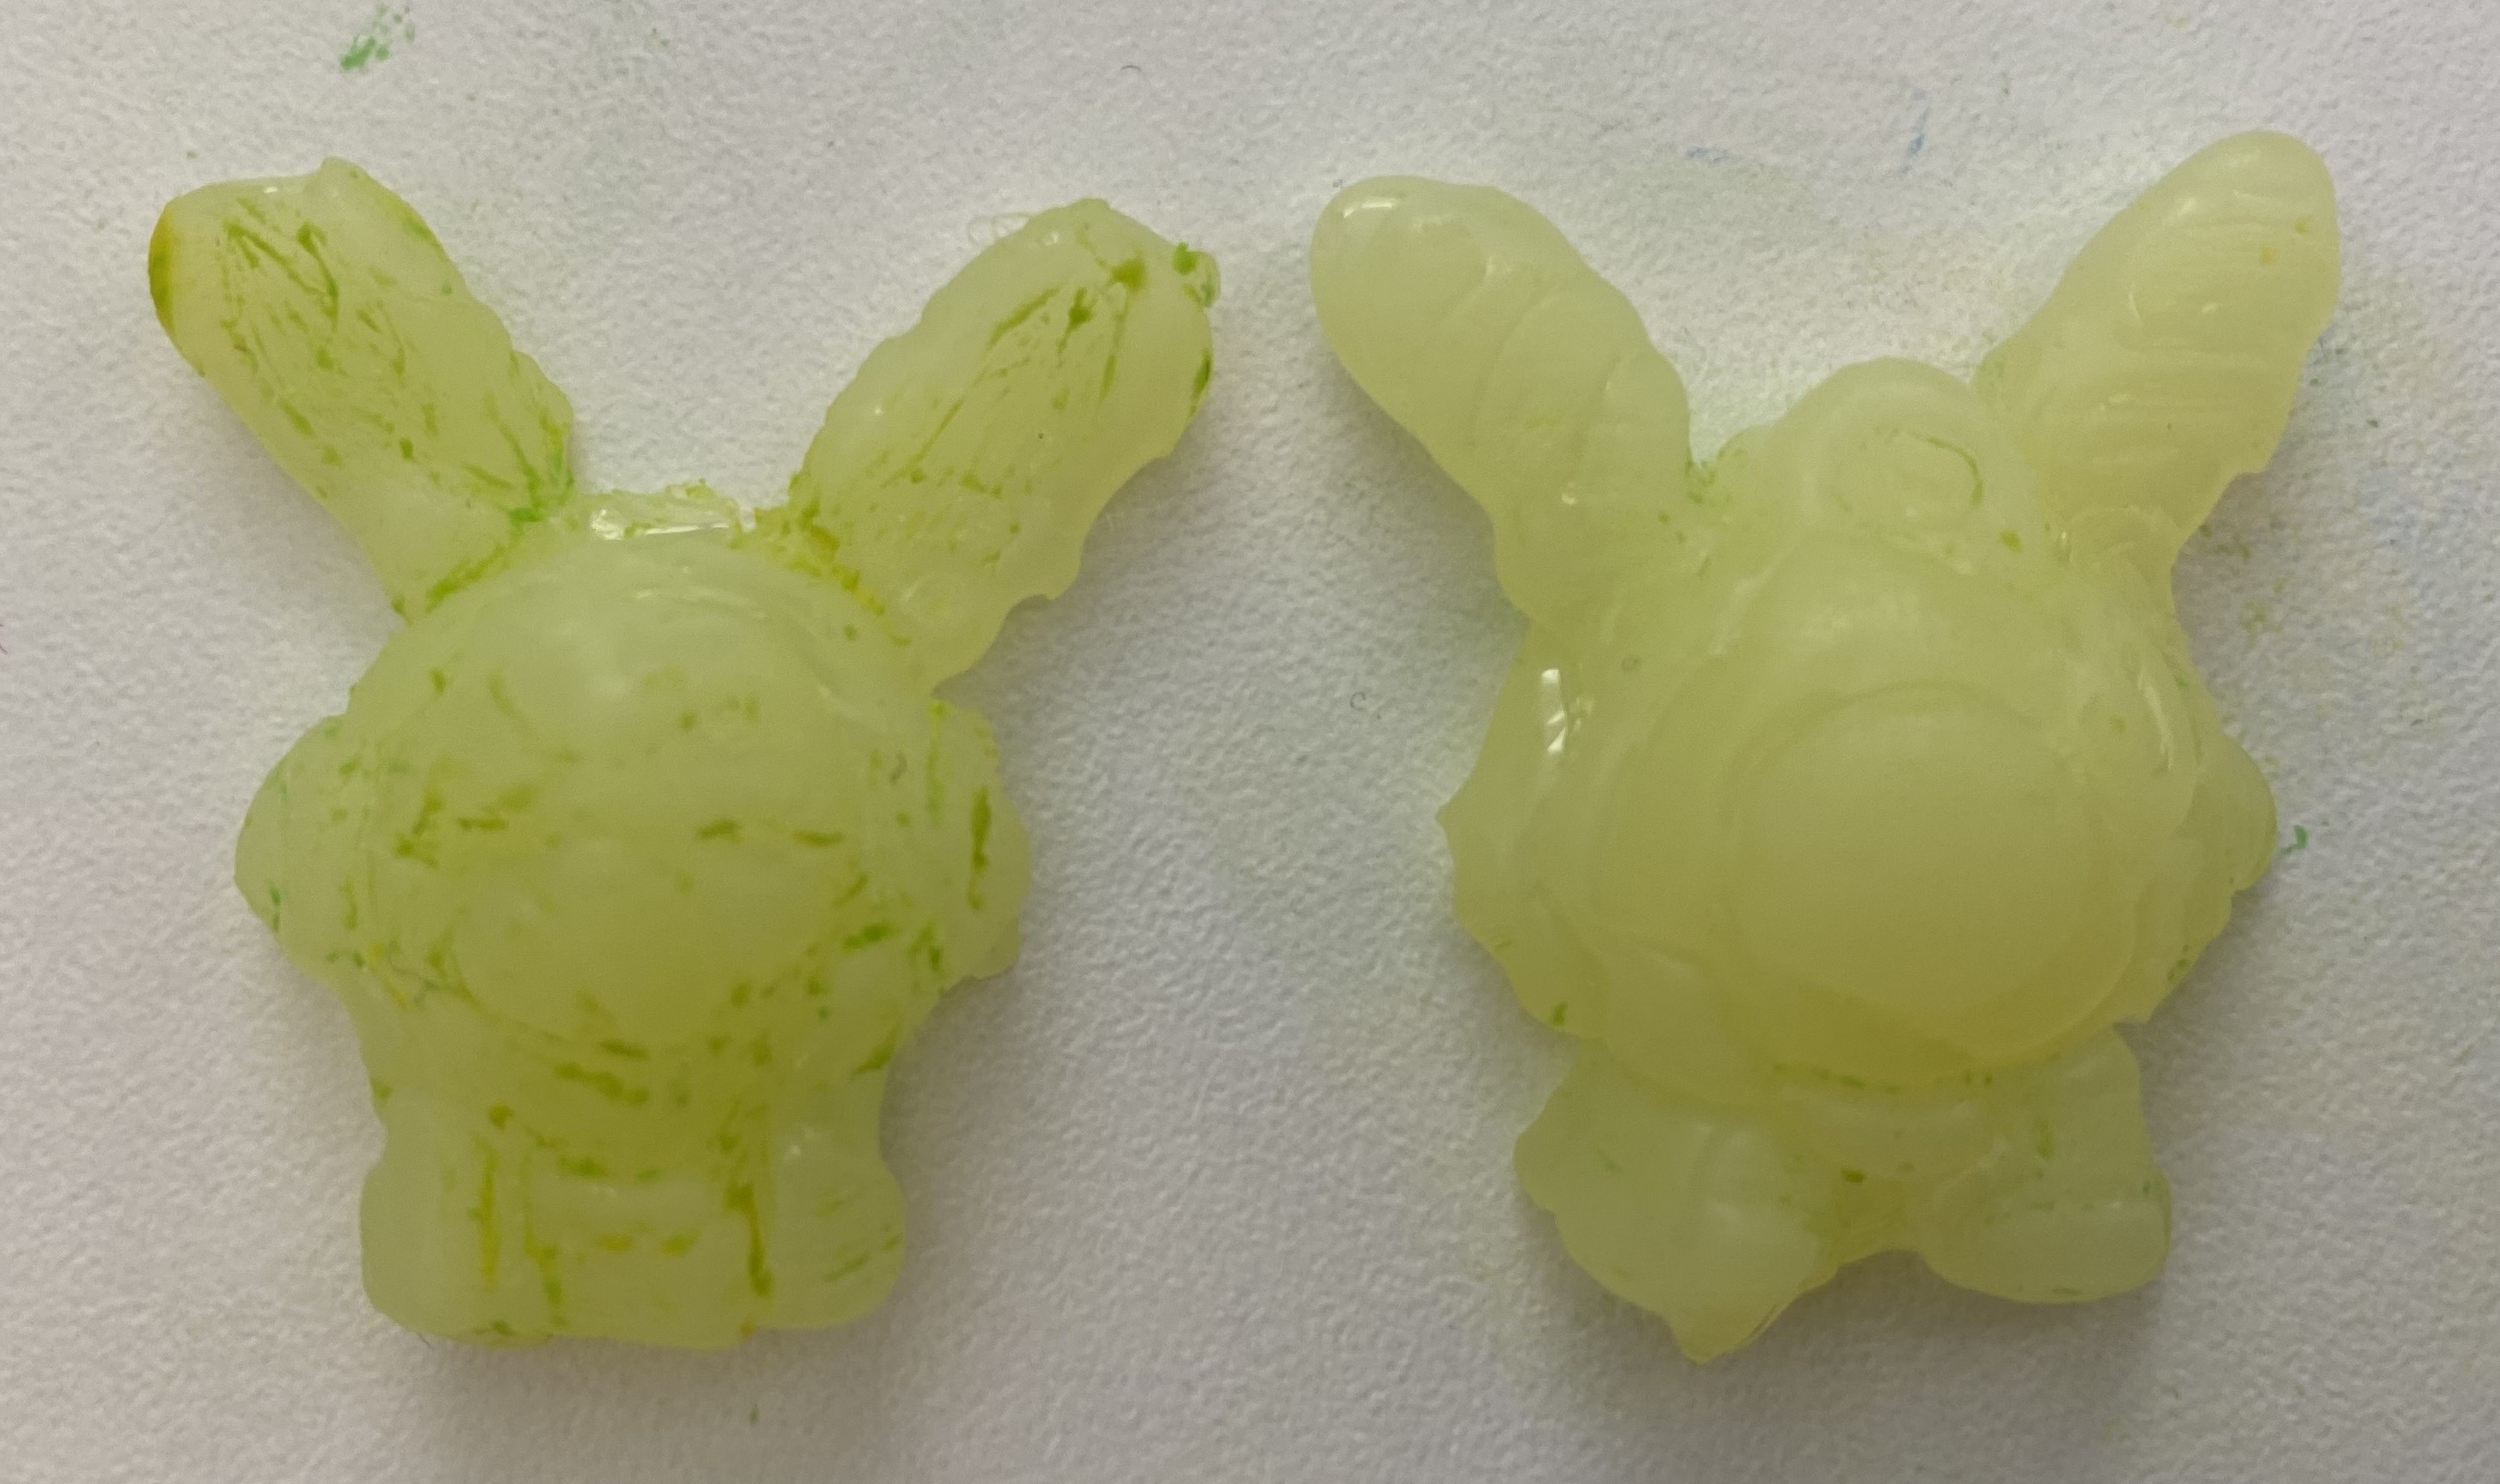 Two halves of the new rabbit toy model made from the glue 